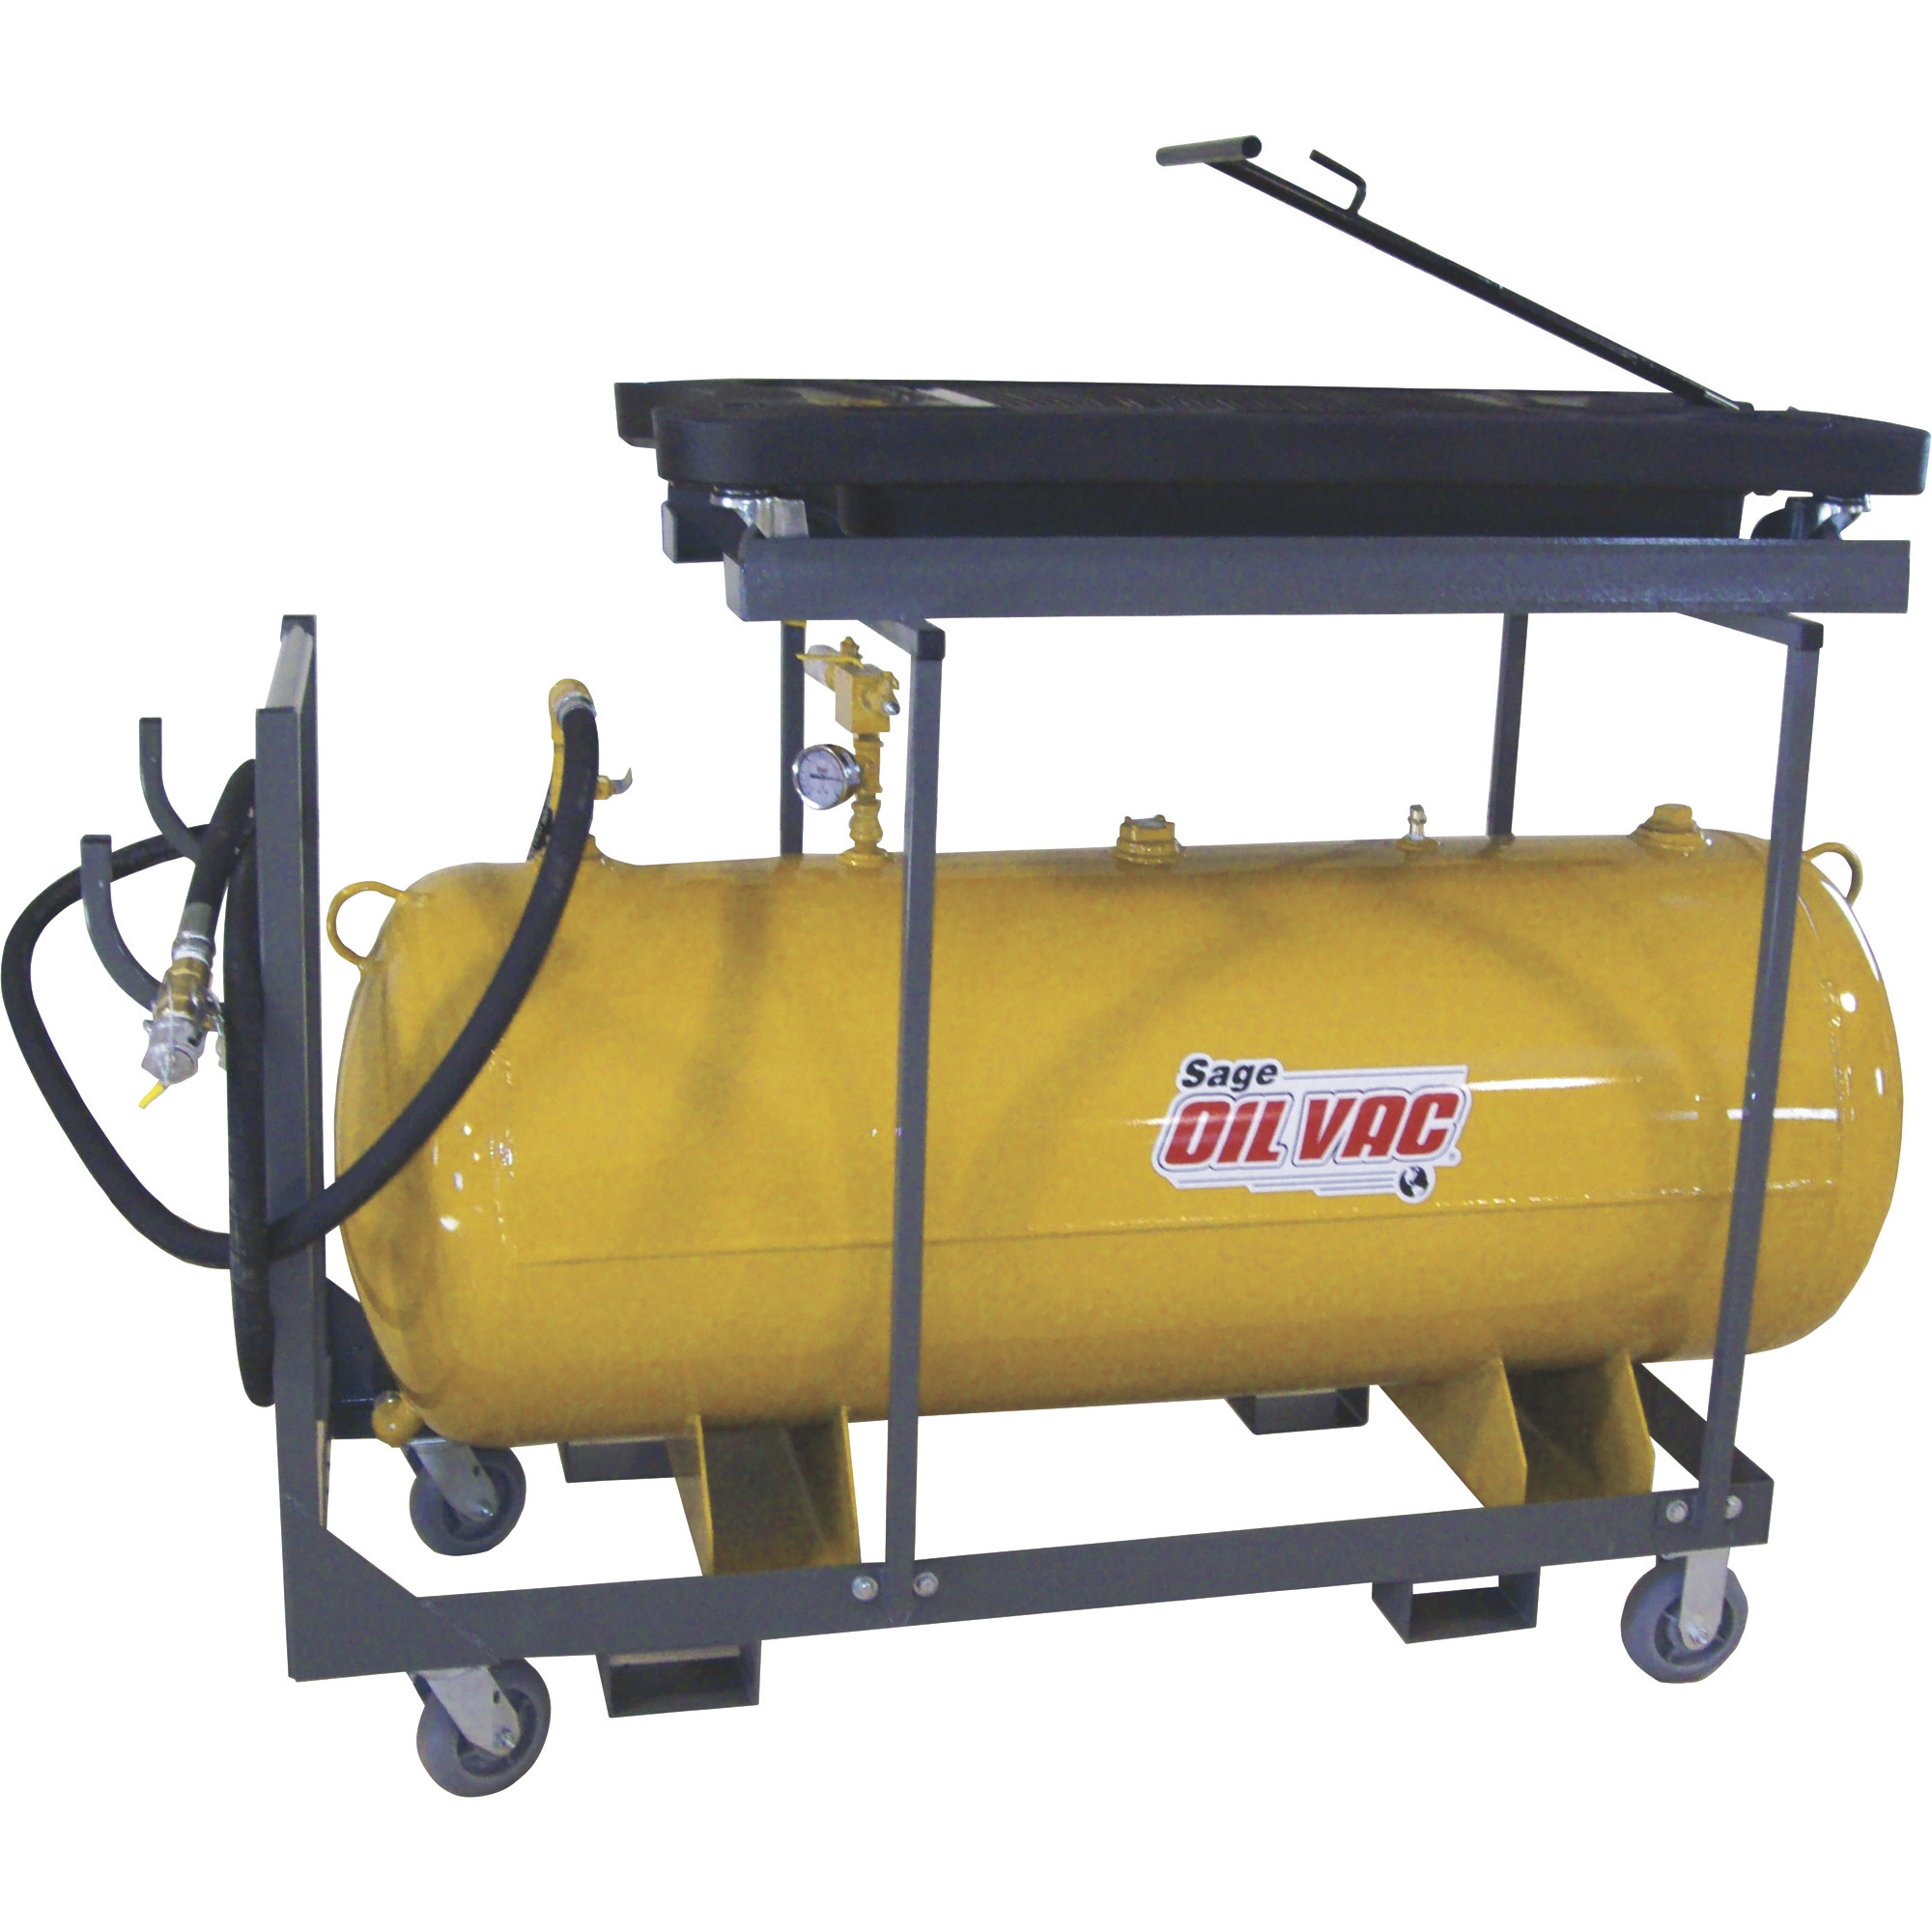 Sage Oil Vac Fluid Recovery System â 120-Gal. Tank, Model 30120V